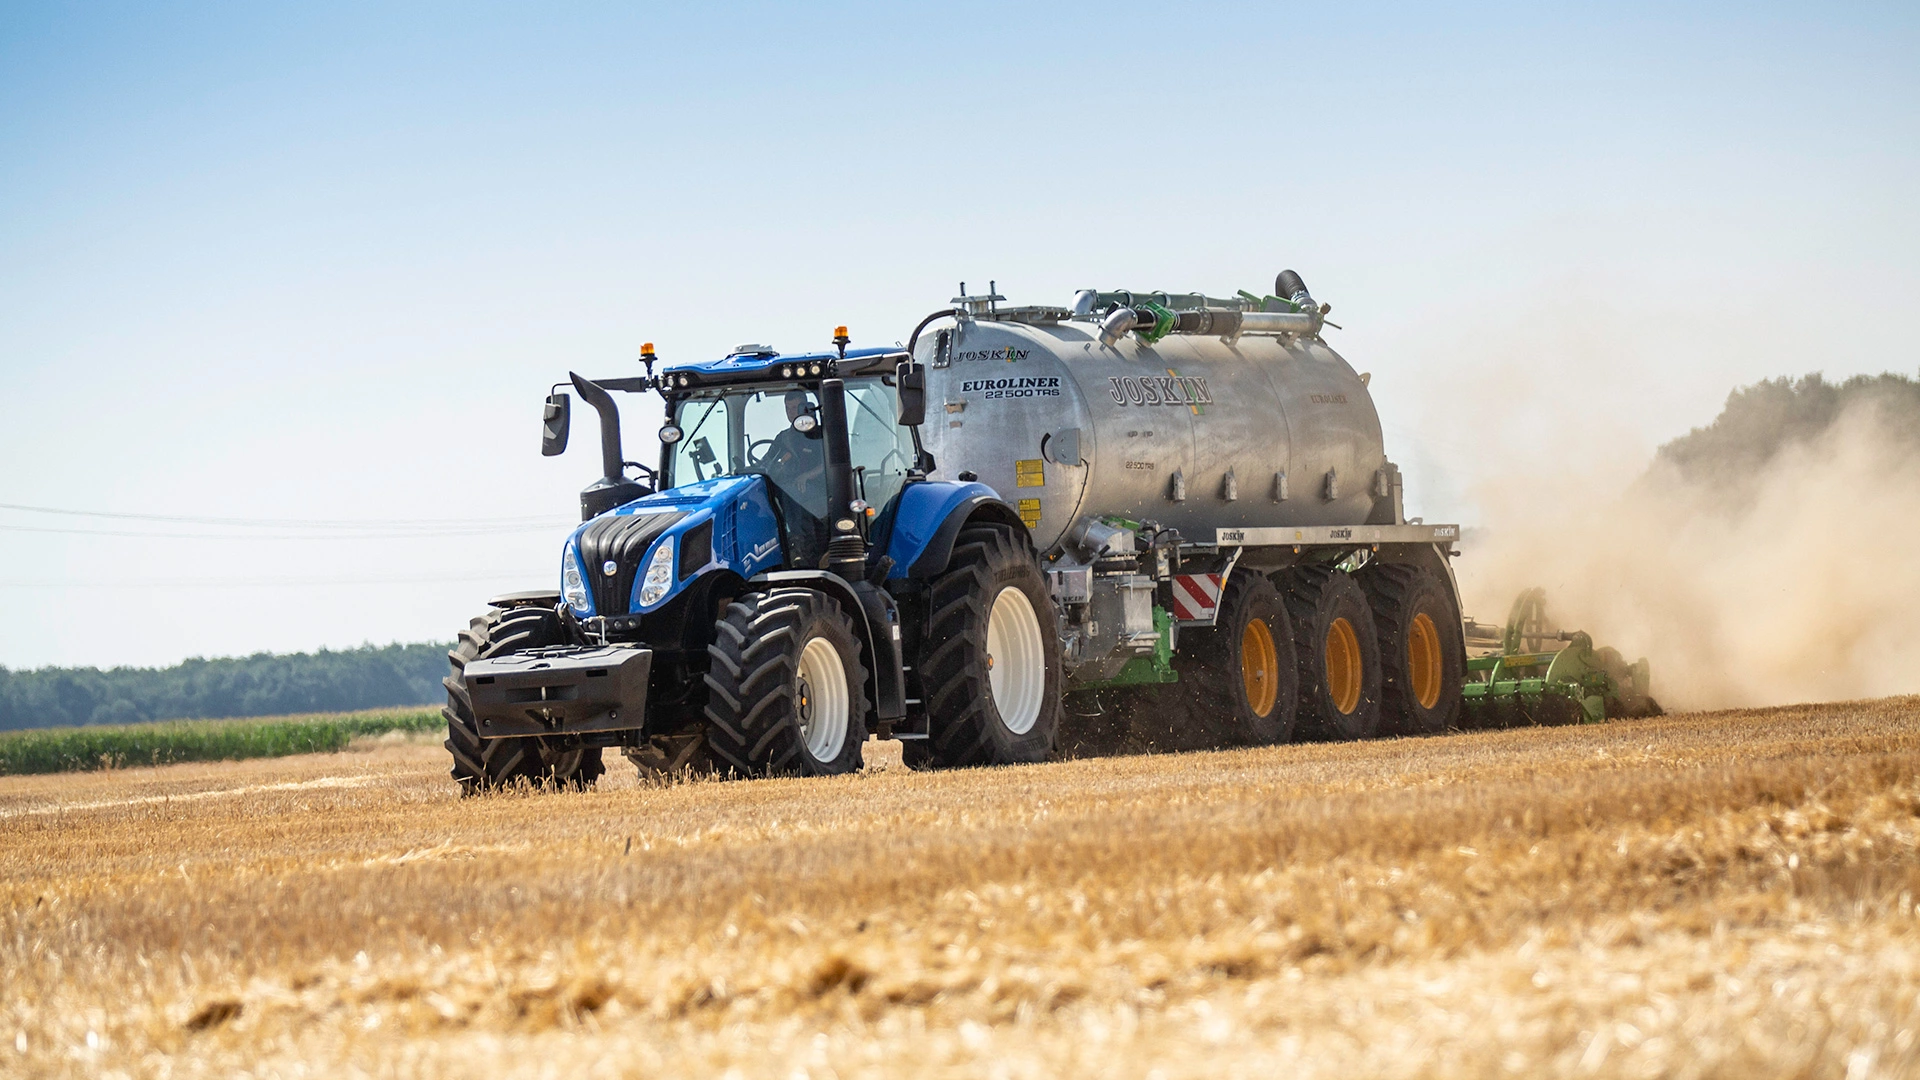 New Holland Tractor T8 Genesis with trailer in a field, harvesting crops, creating dust trail.